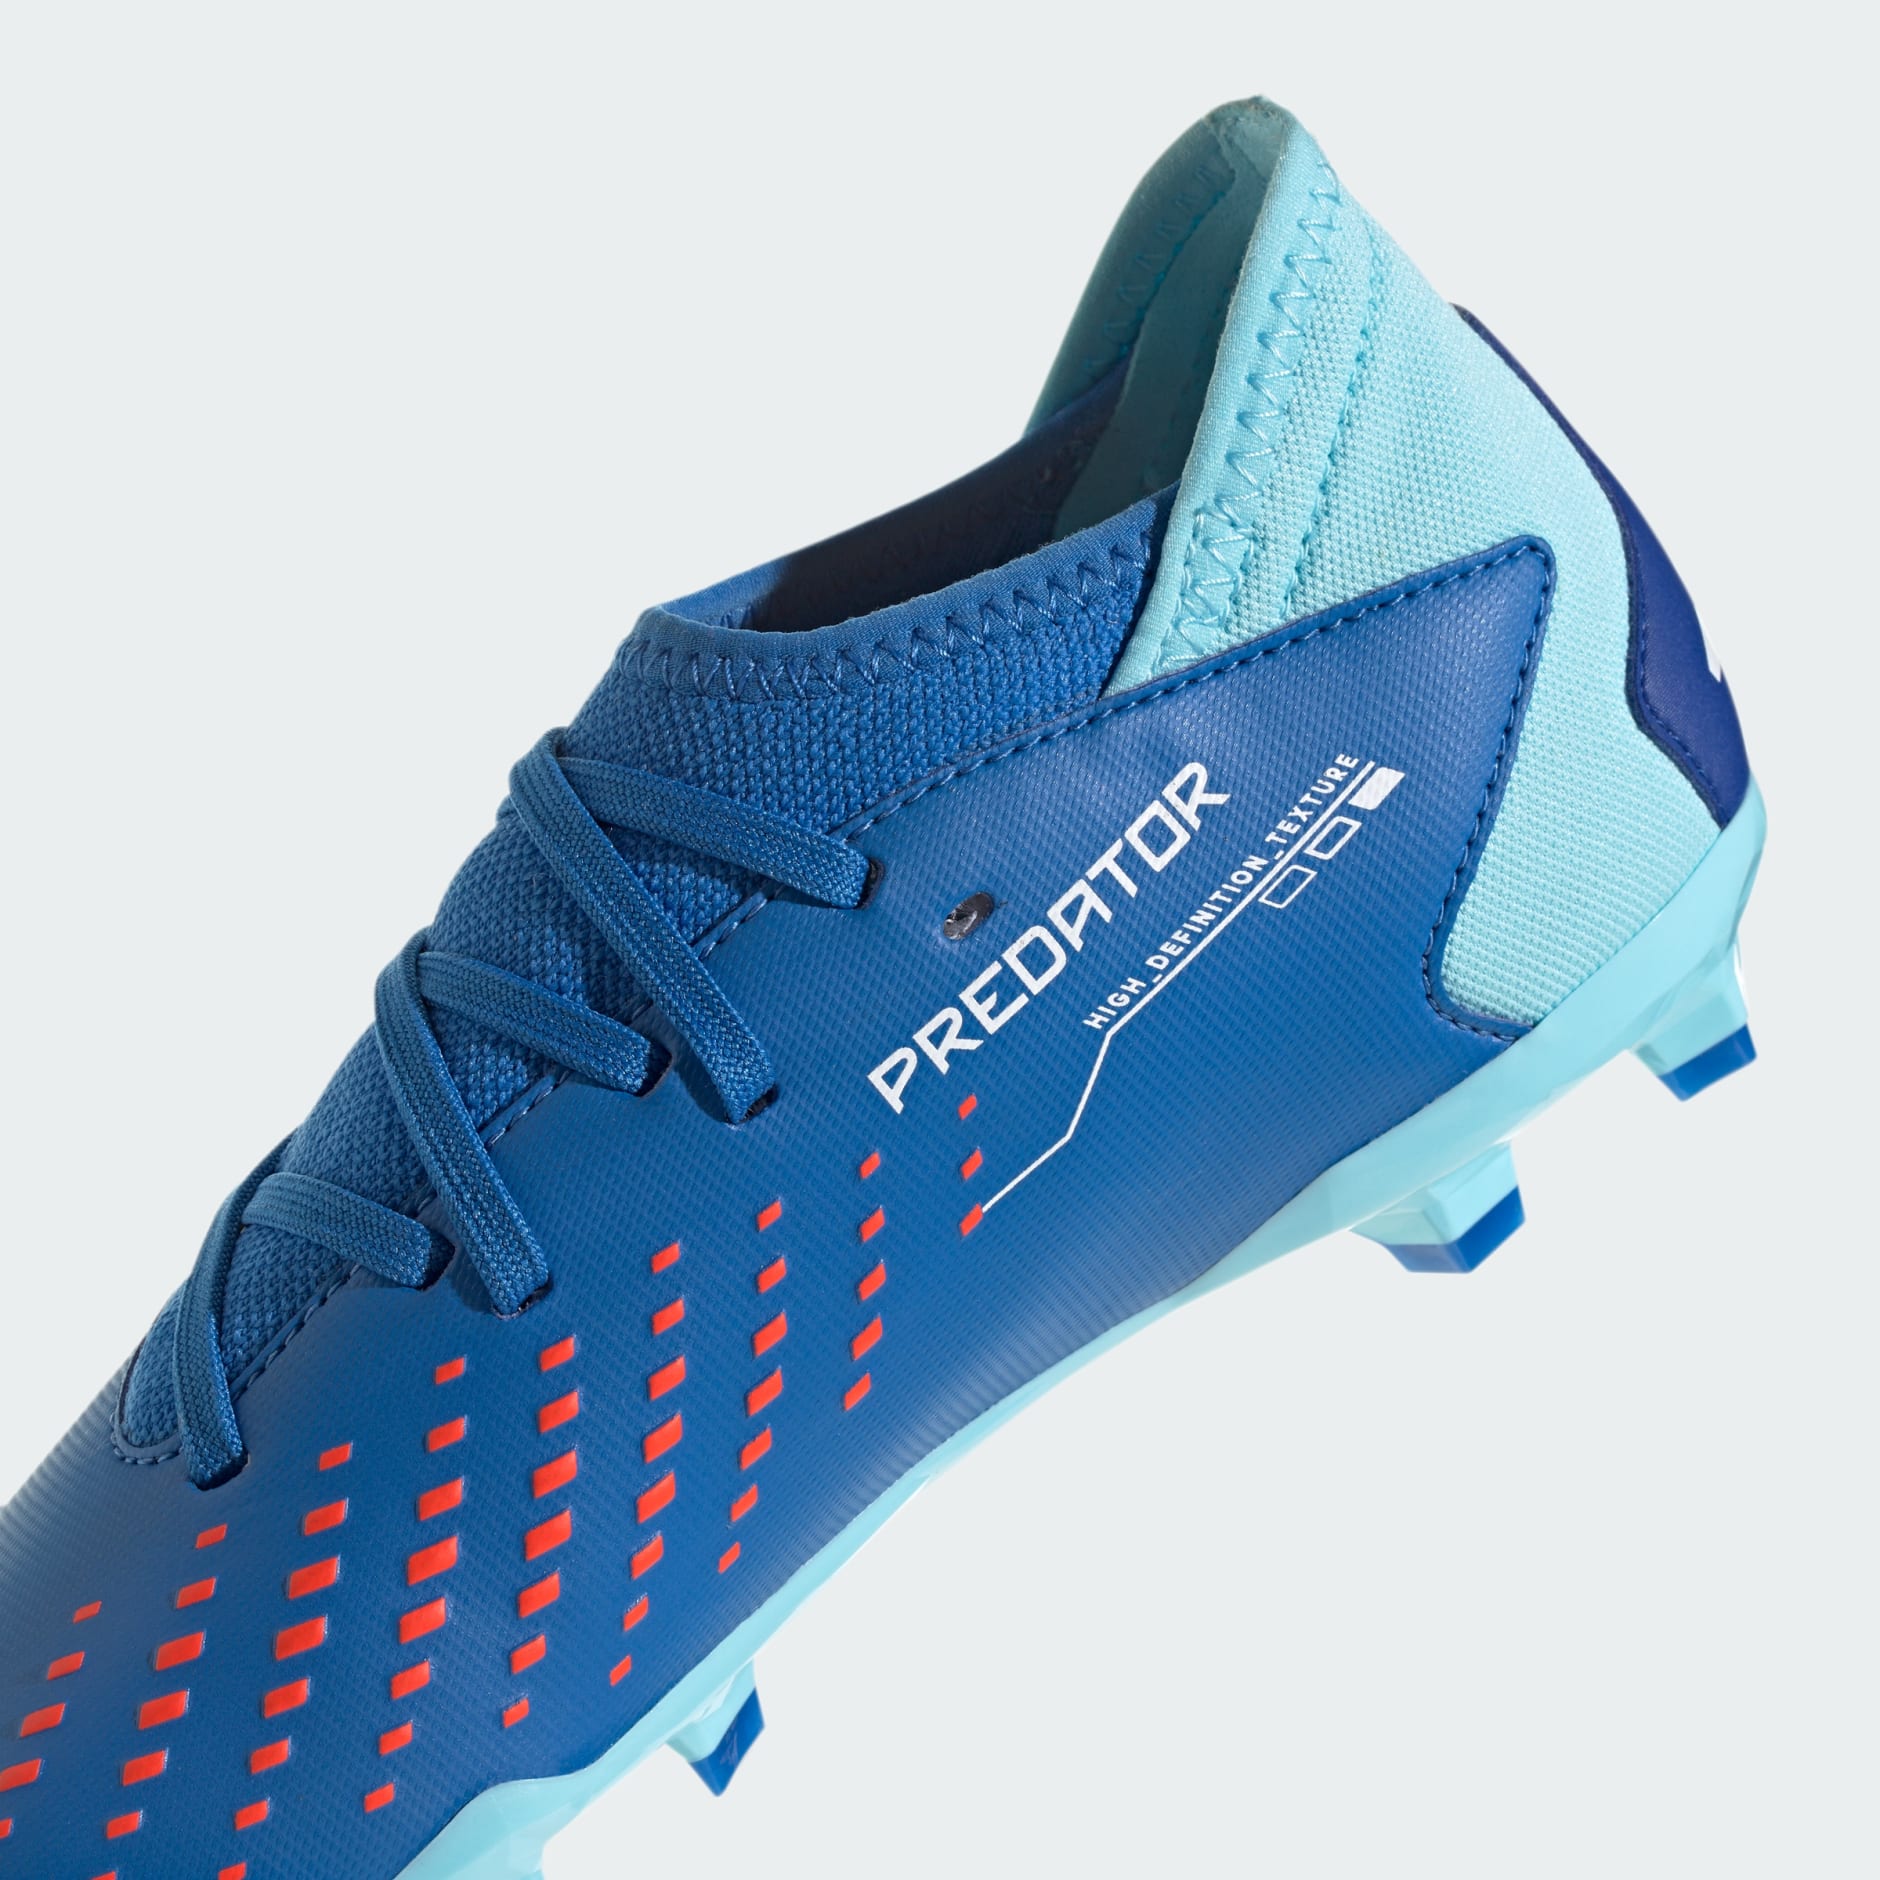 Kids Shoes - Boots Blue - Oman Accuracy.3 Firm adidas Predator | Ground